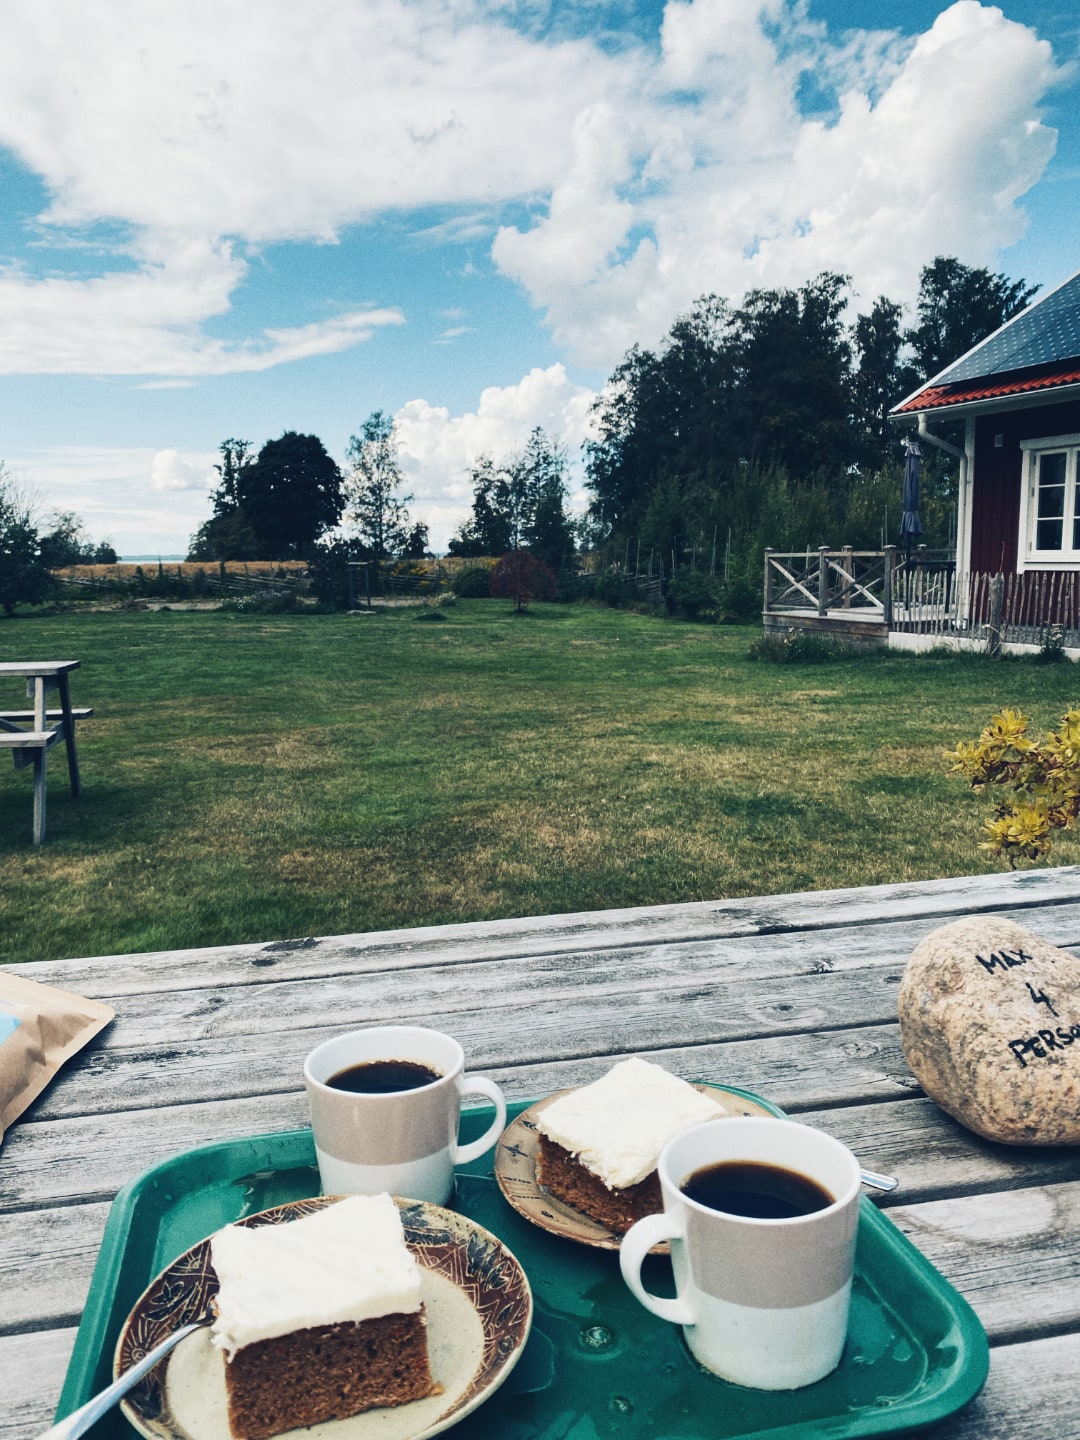 Coffe and carrot cake on a wooden table outside in, what looks like, a garden. In the background, one can catch a glimpse of a roundpole fence.